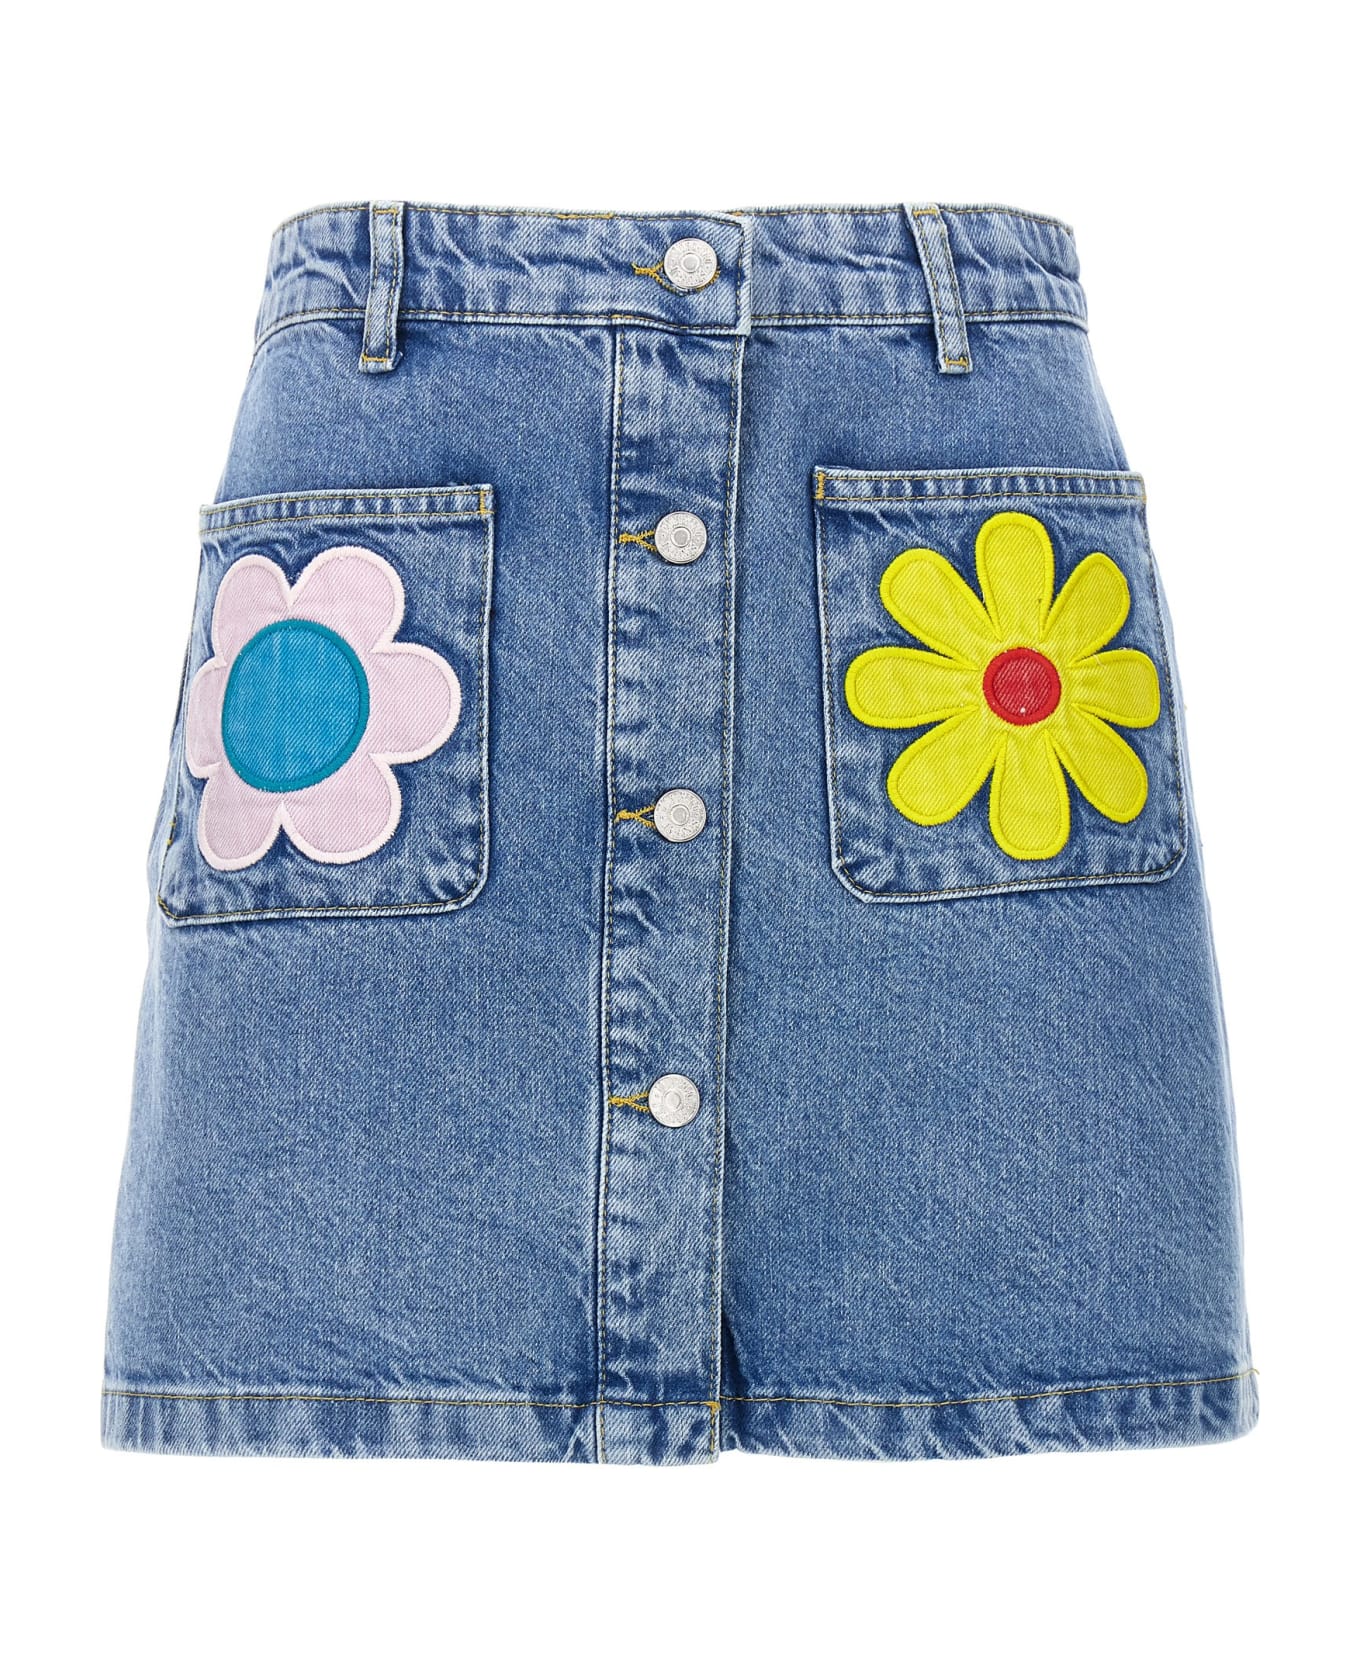 M05CH1N0 Jeans Floral Embroidery Skirt - Fantasia Blu